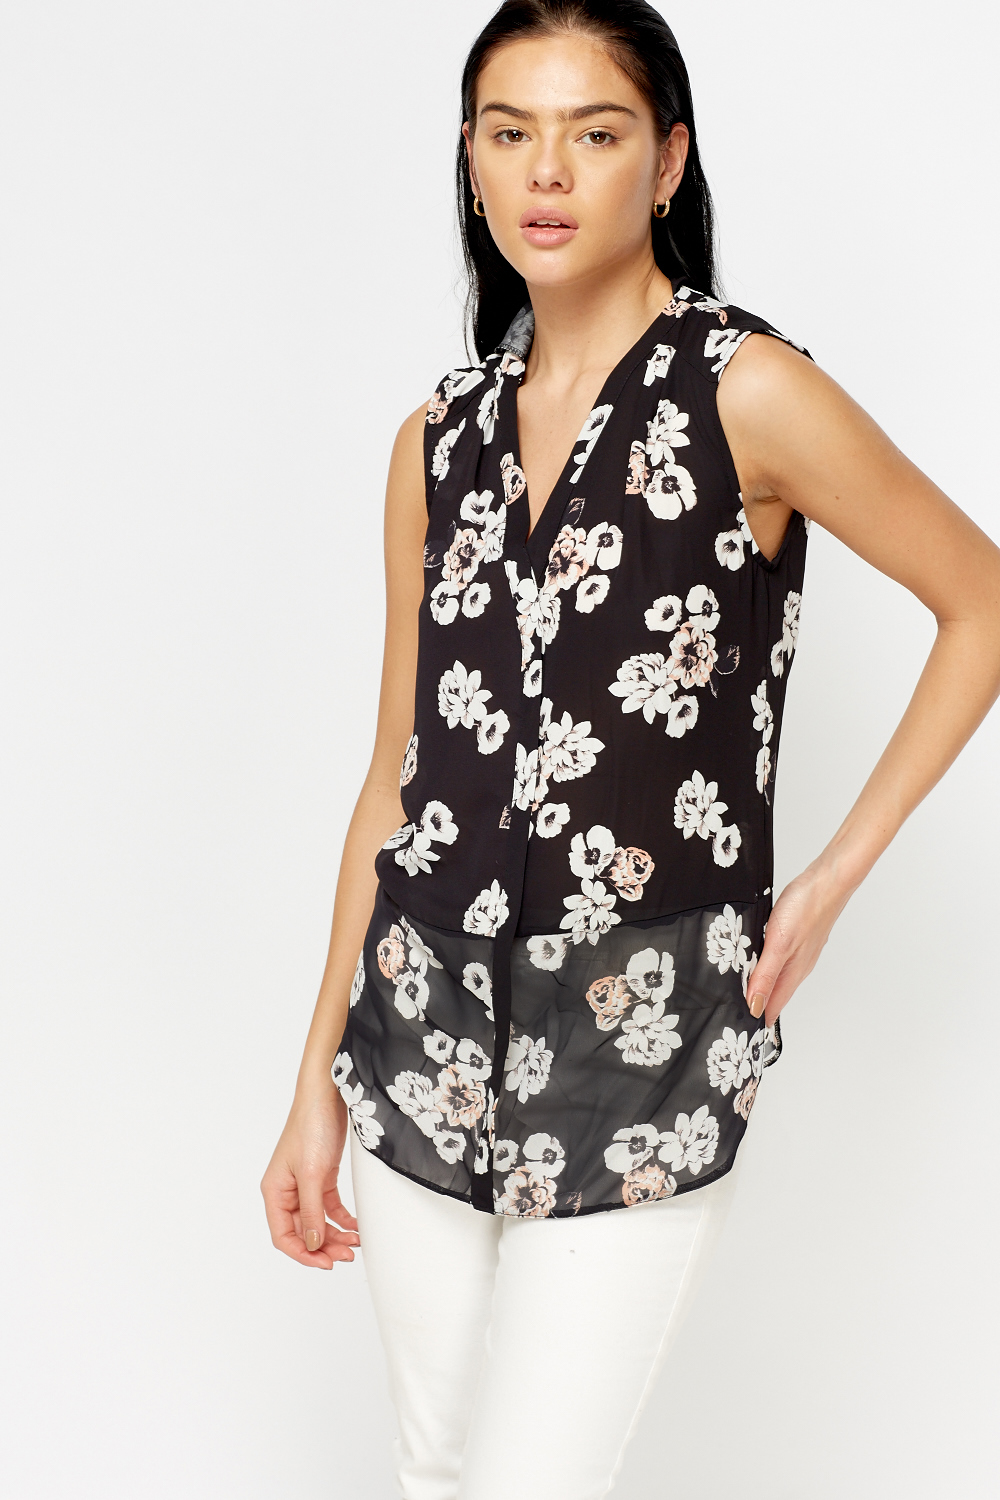 Sheer Floral Blouse Top - Just $7